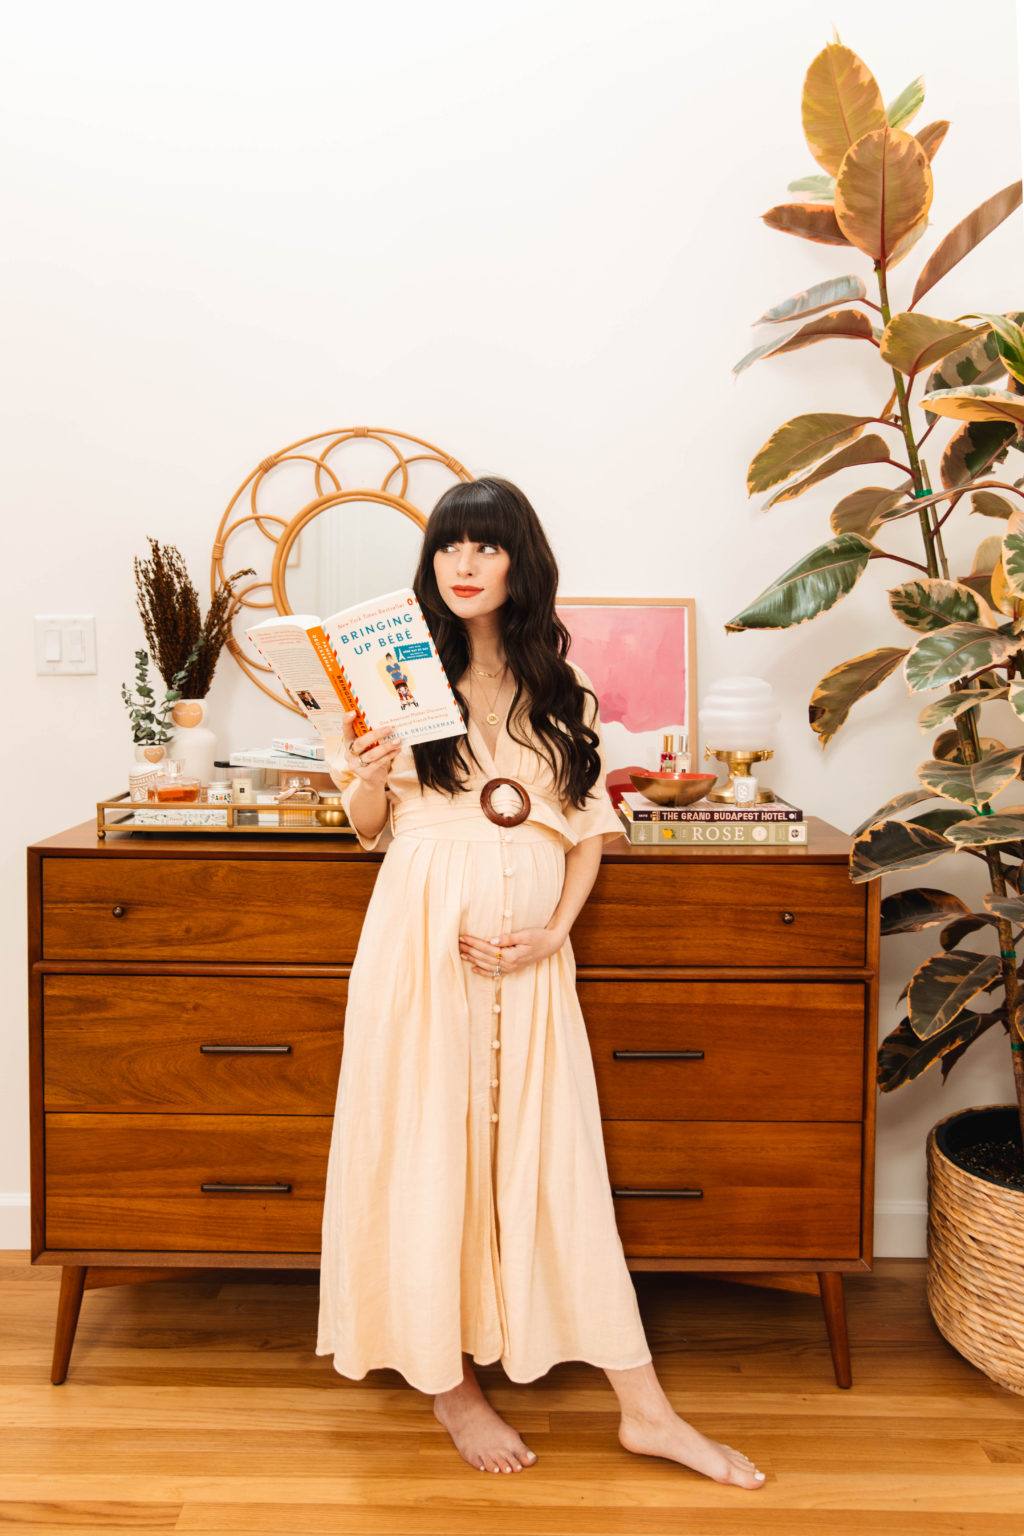 3 Baby Books To Read While Pregnant